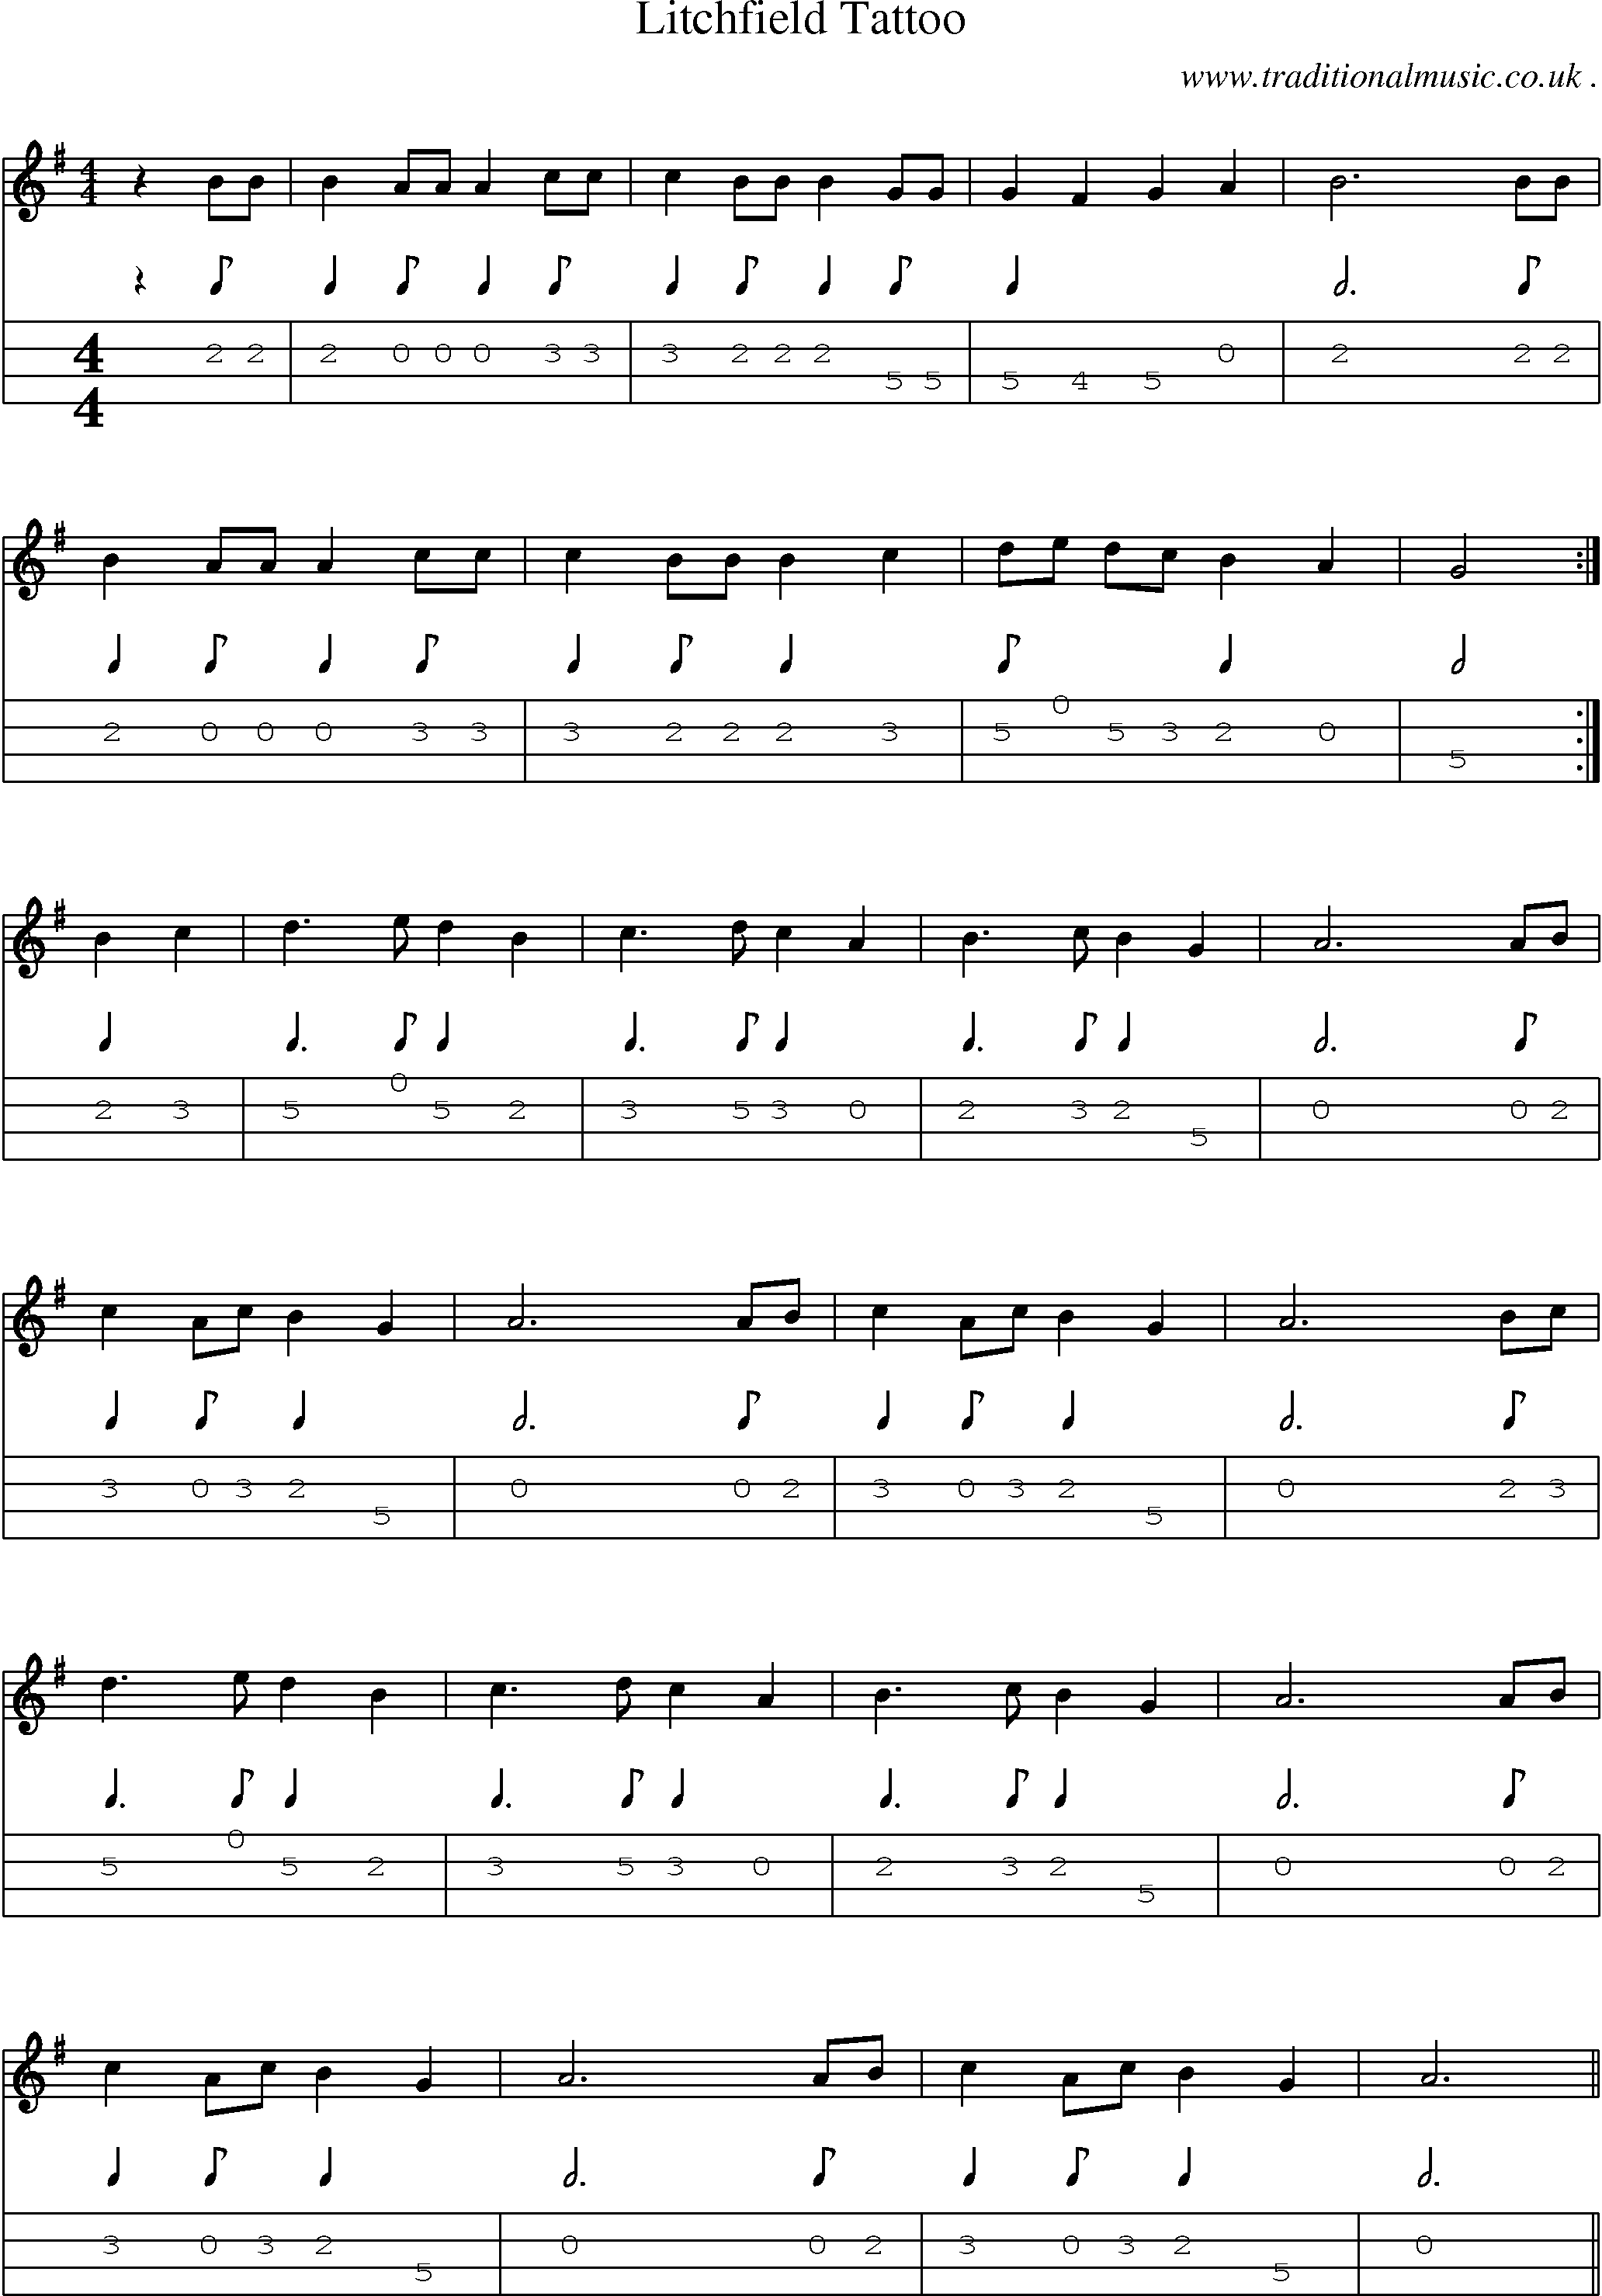 Sheet-Music and Mandolin Tabs for Litchfield Tattoo